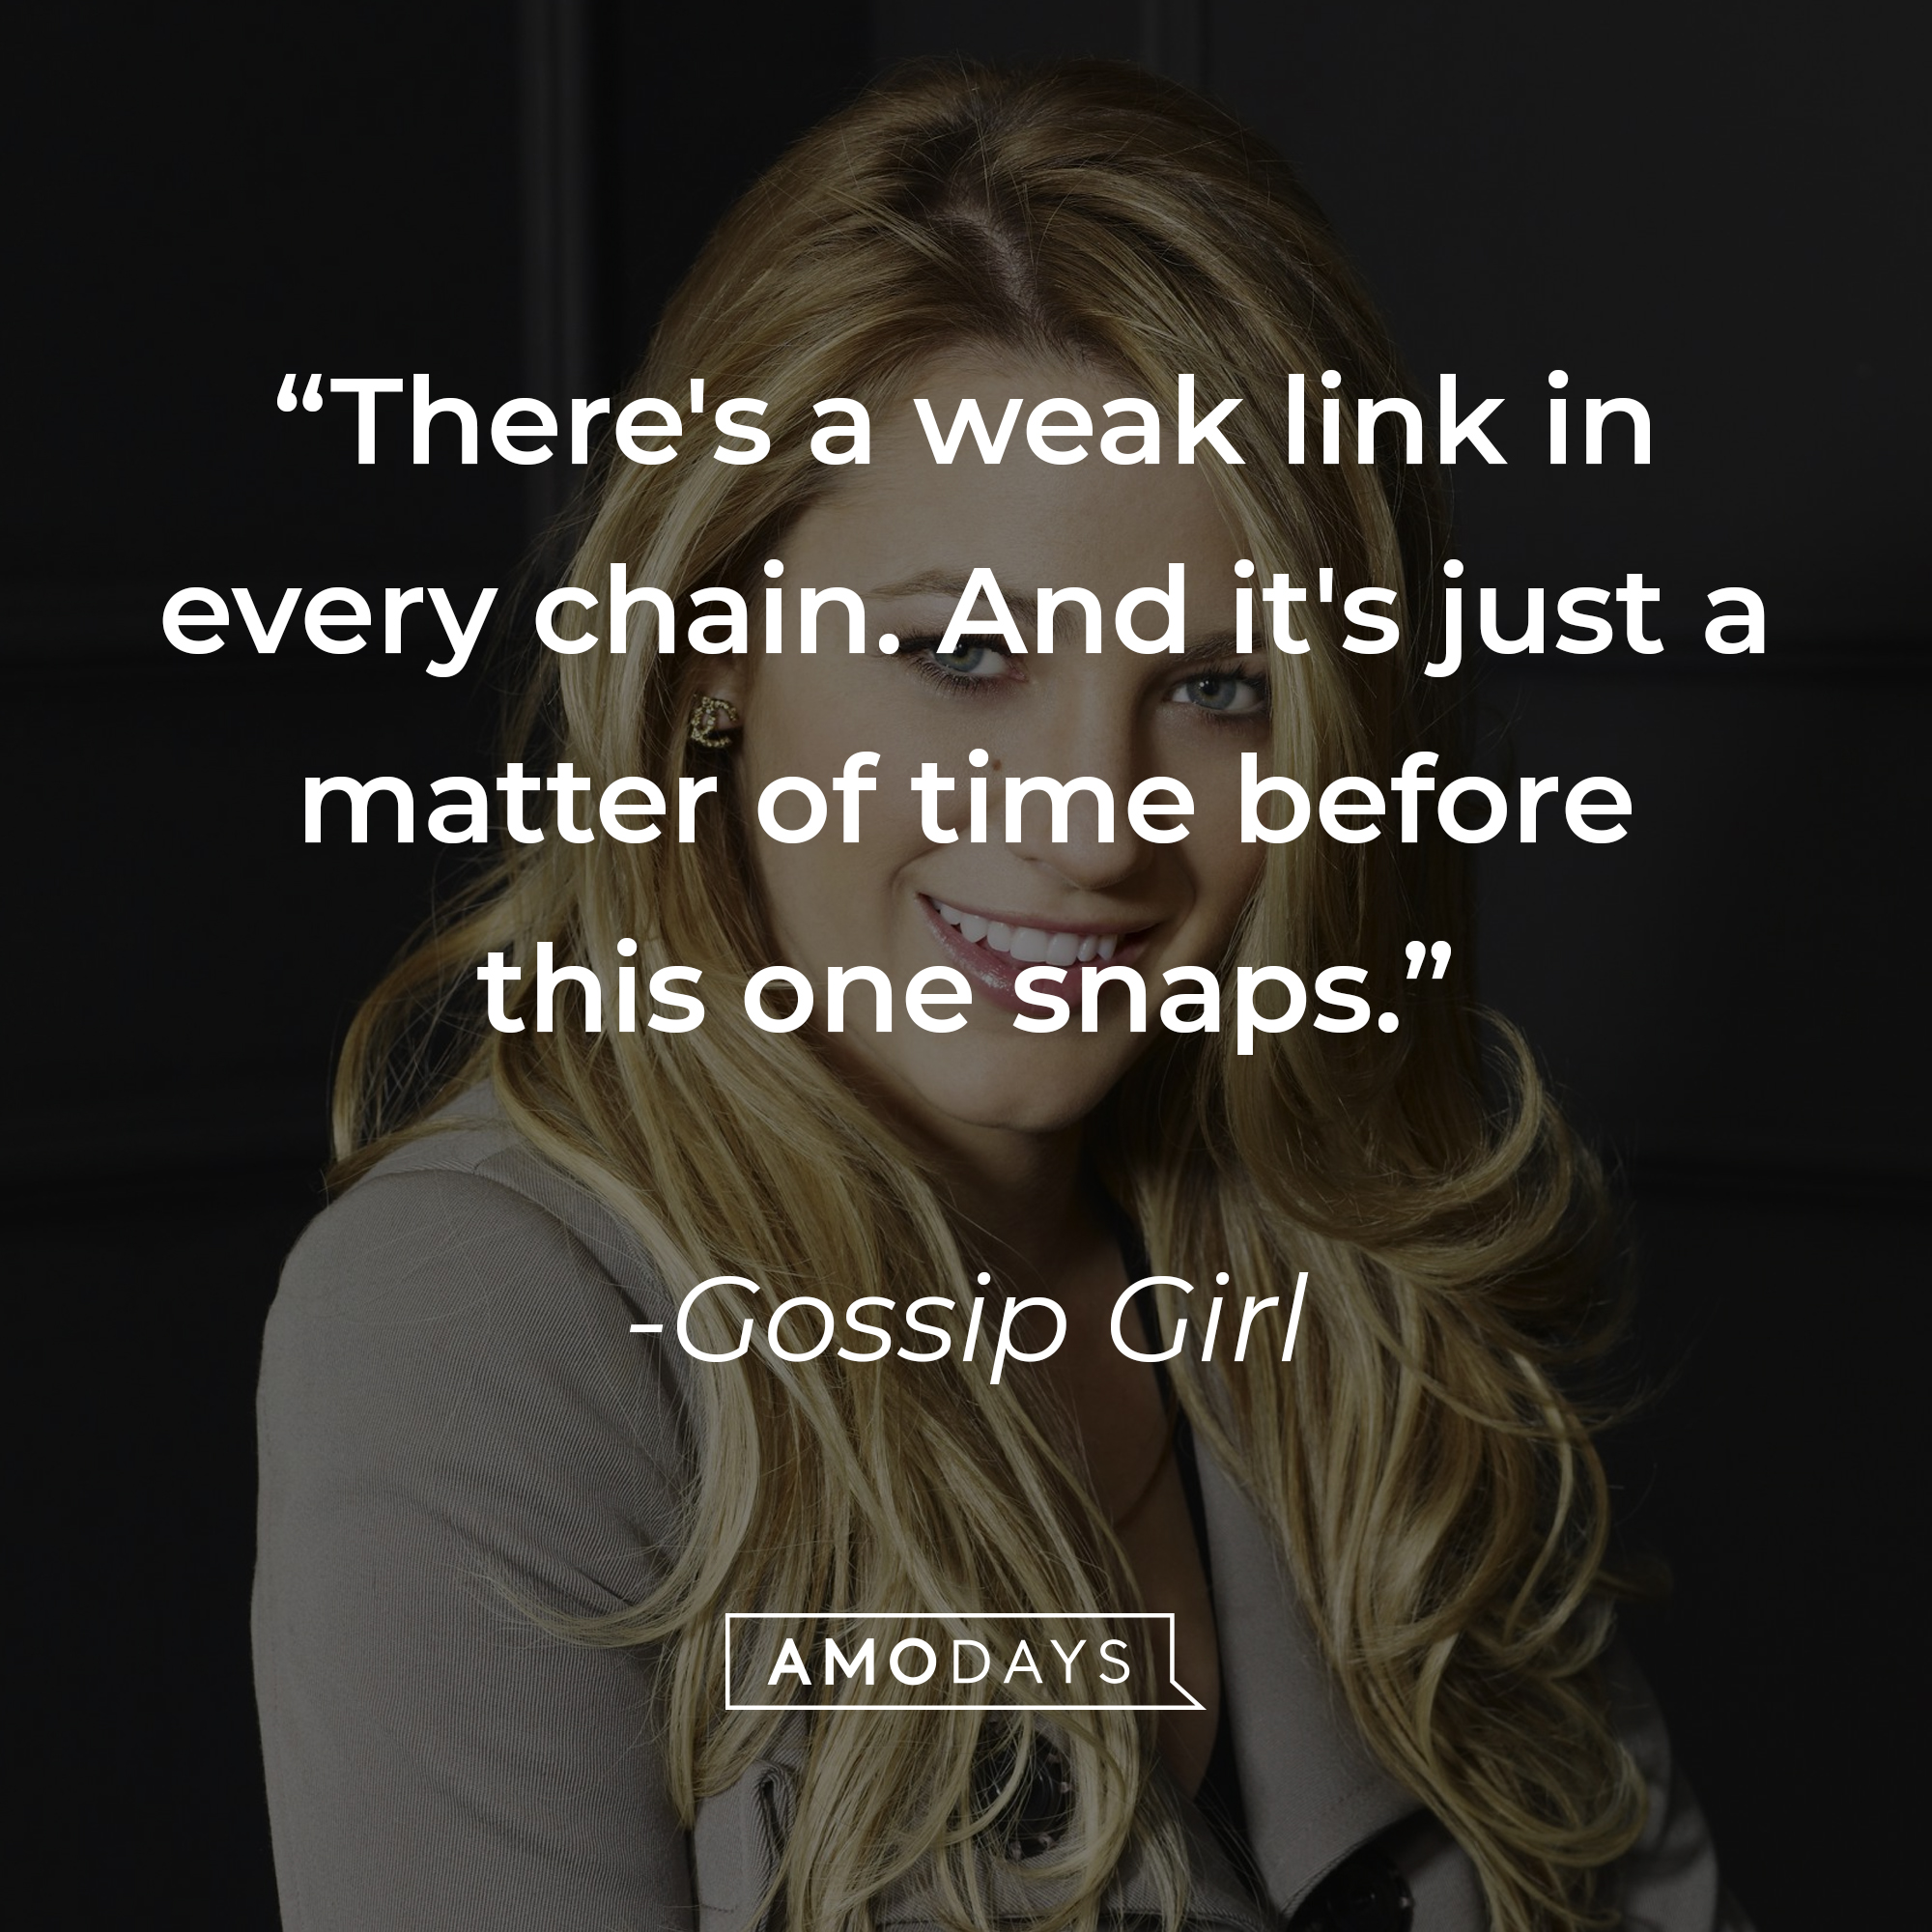 Image from "Gossip Girl" with the quote: "There's a weak link in every chain. And it's just a matter of time before this one snaps." | Source: facebook.com/GossipGirl